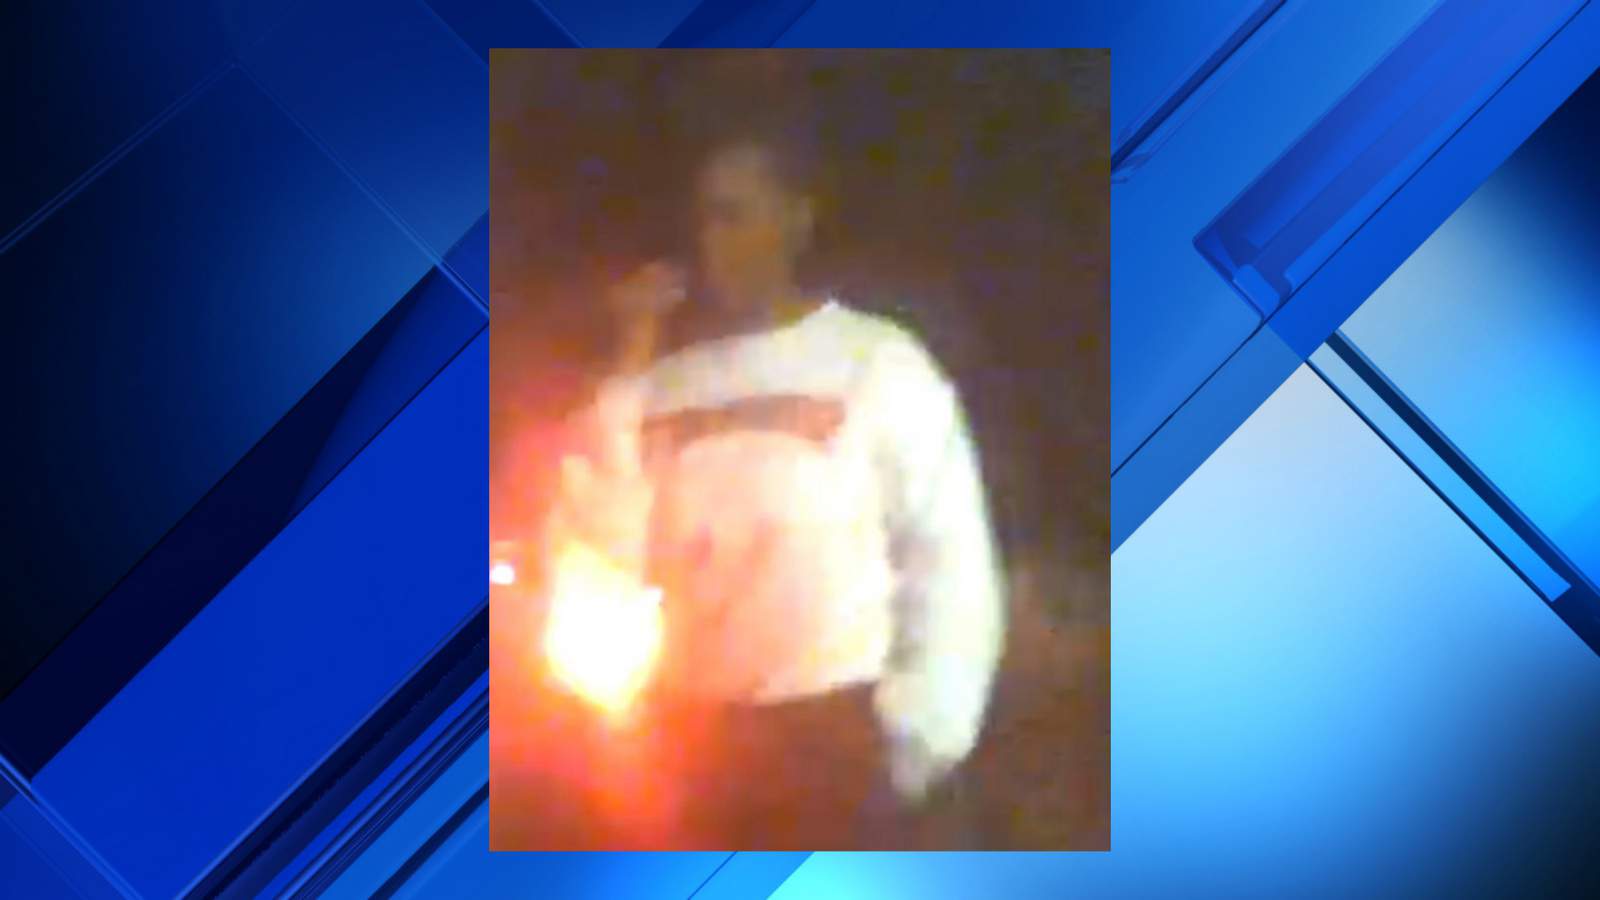 Man wanted for questioning in Ypsilanti Township homicide of 32-year-old